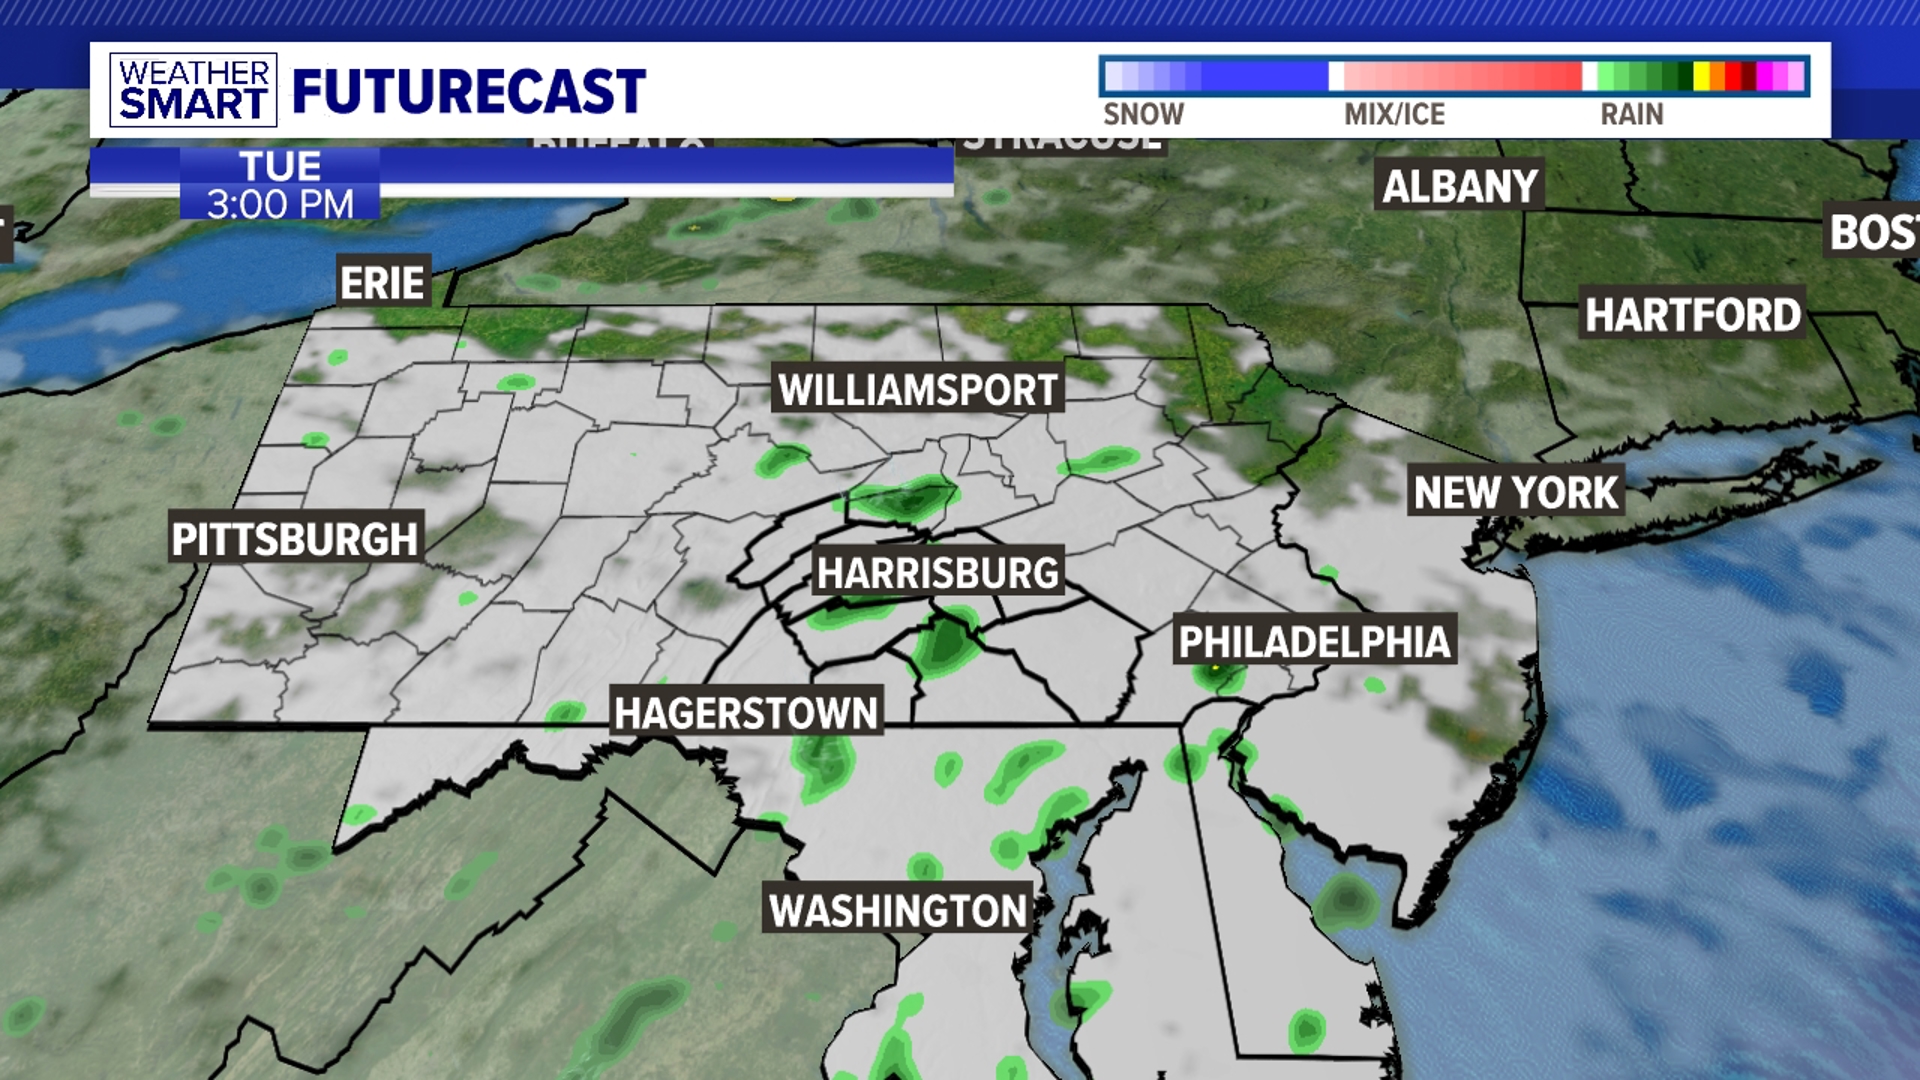 More widespread showers are expected Wednesday. The week ends drier, but clouds hang around.